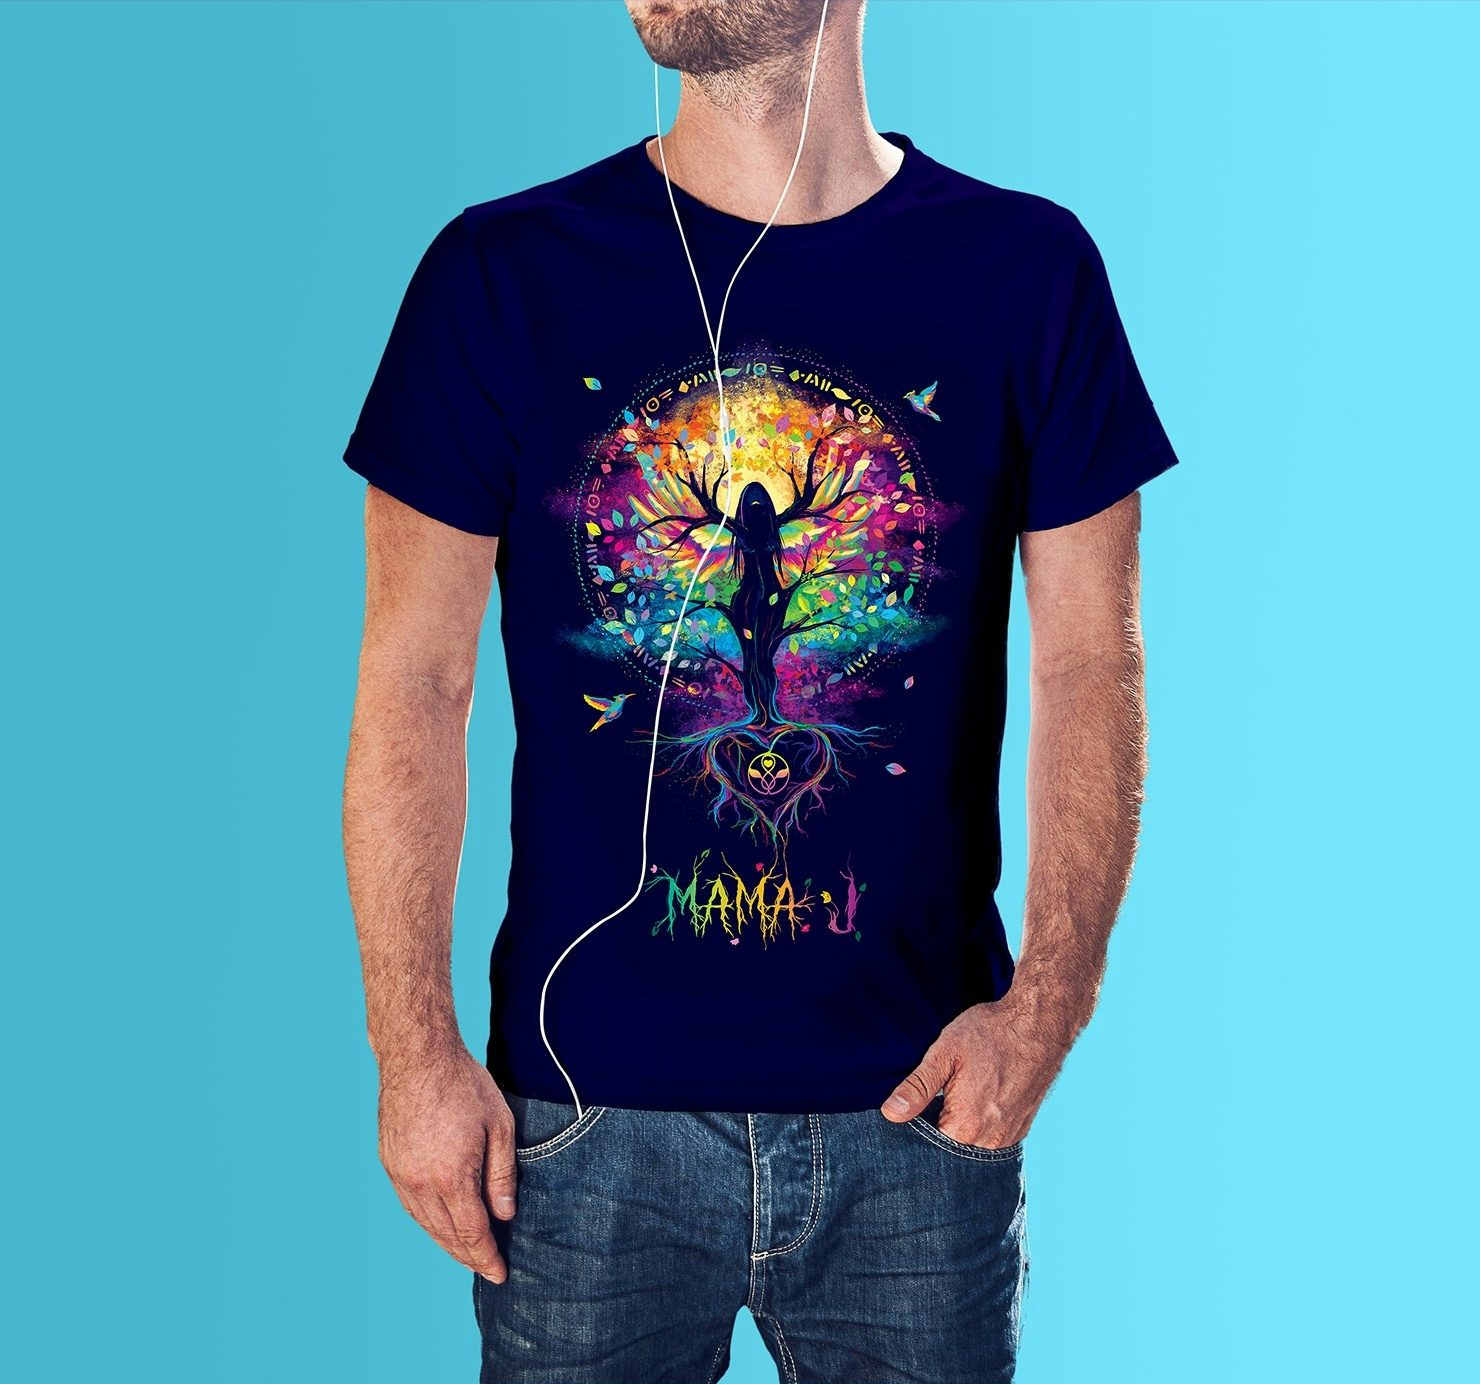 Samarbejde Beregn omhyggeligt The 10 best freelance t-shirt designers for hire in 2023 - 99designs